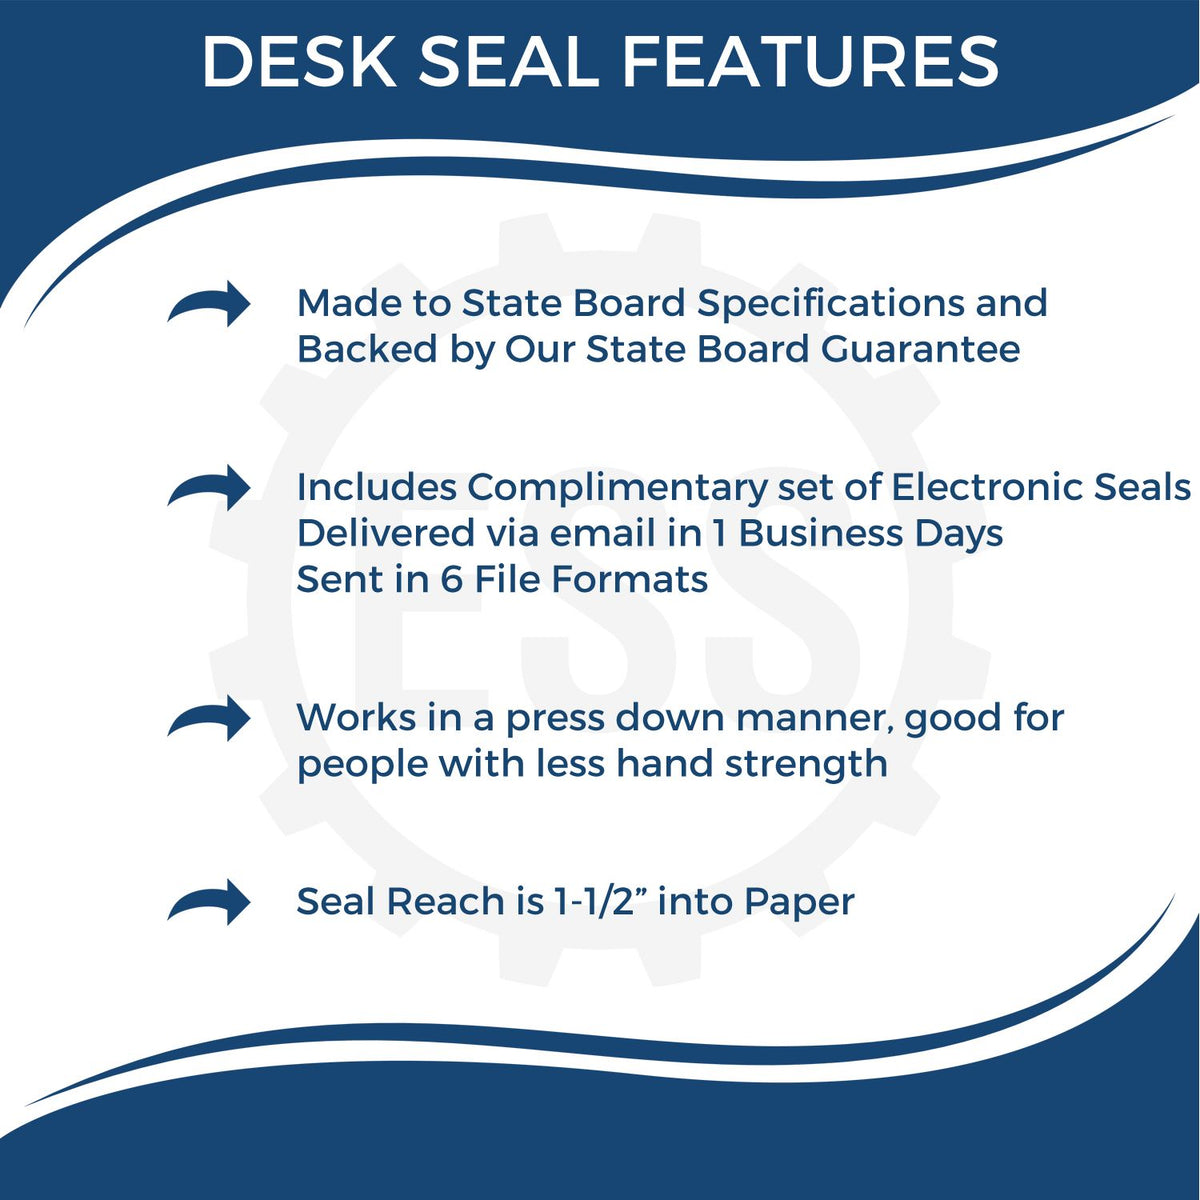 A picture of an infographic highlighting the selling points for the Arizona Engineer Desk Seal